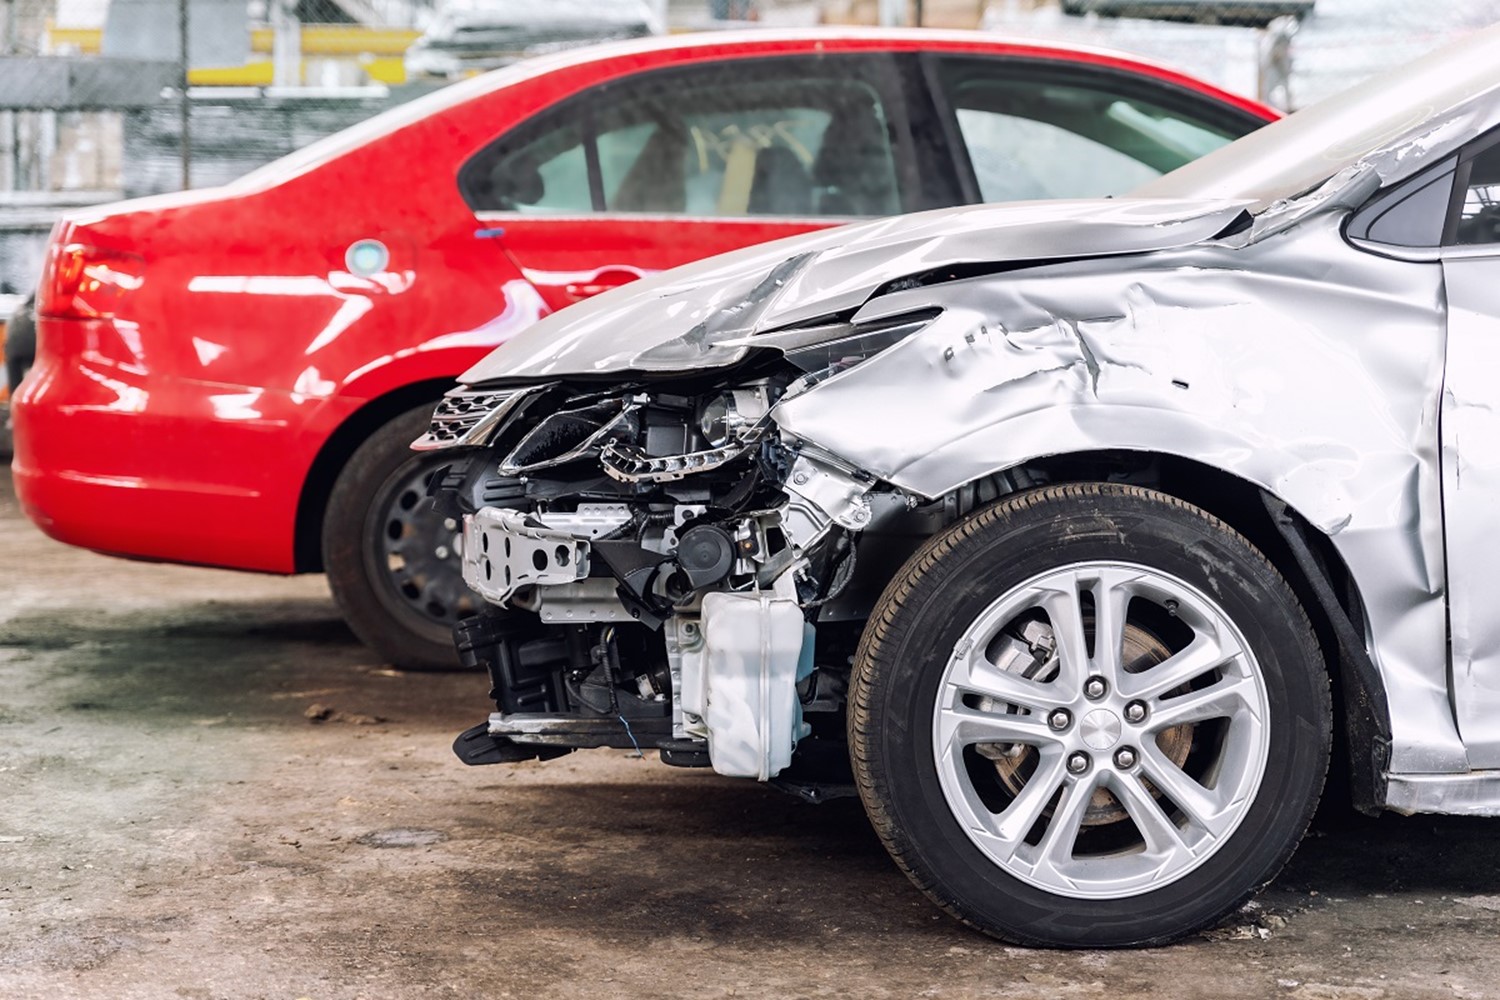 What Happens When Your Car Is Totaled?